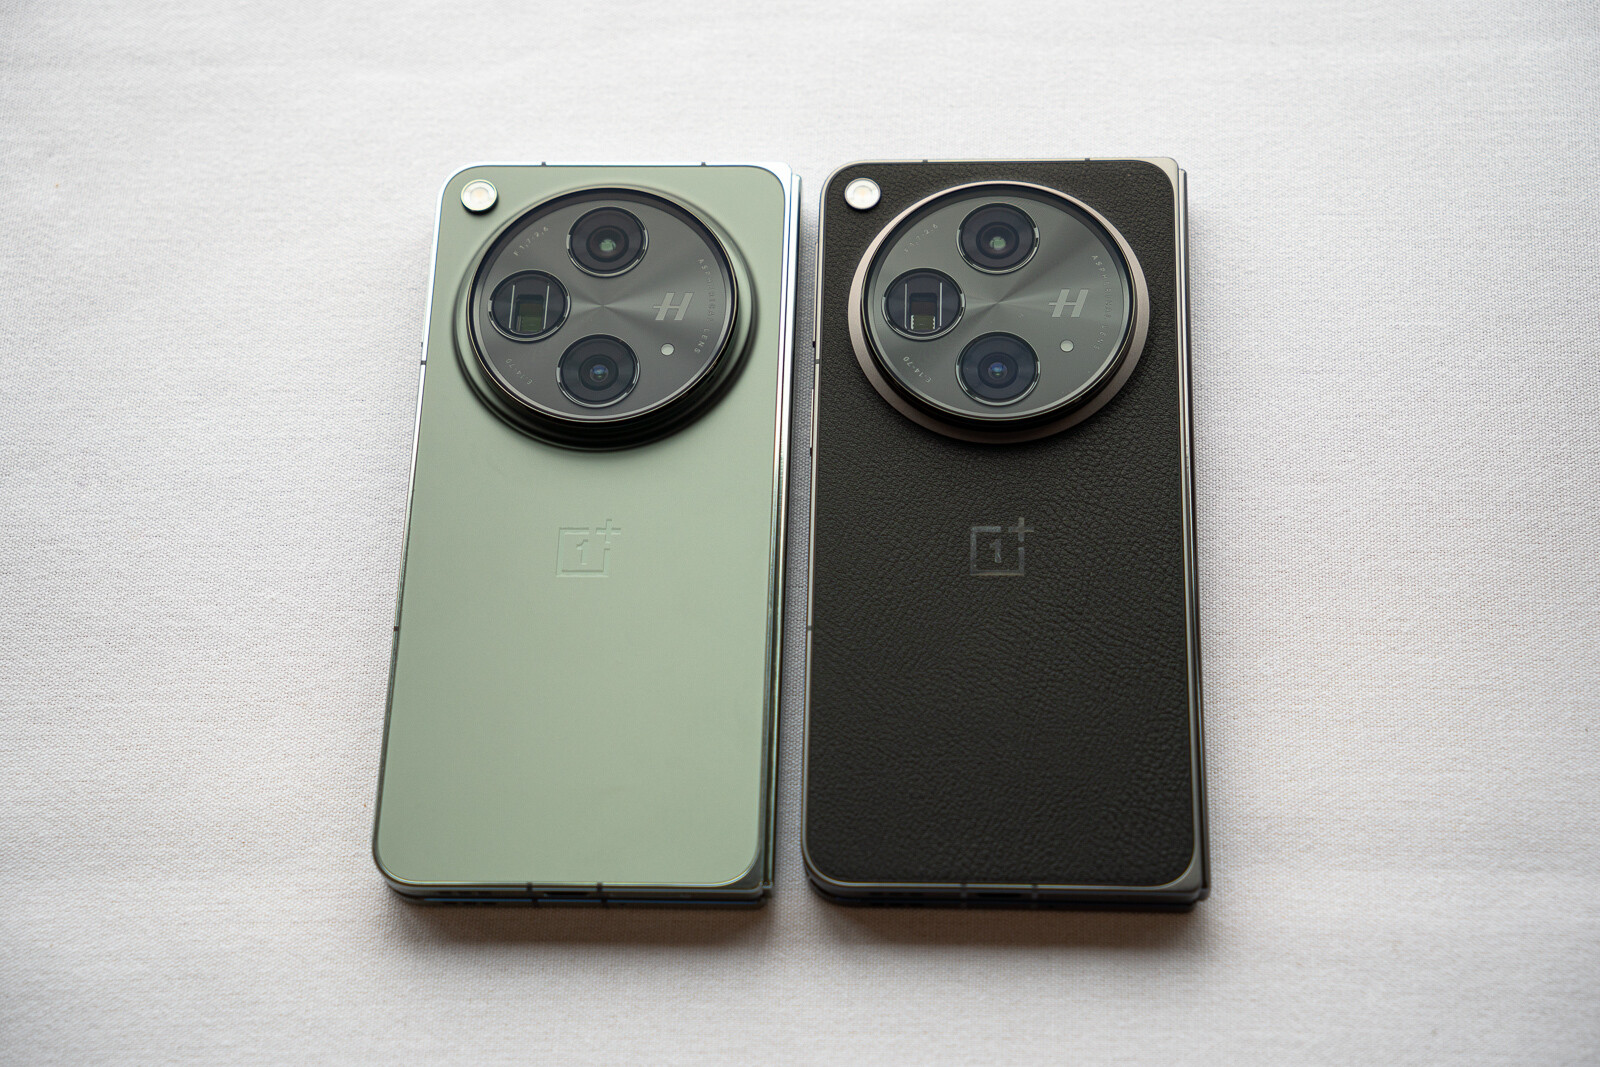 The OnePlus Open in Emerald Dusk and Voyager Black - OnePlus Open colors: all official shades